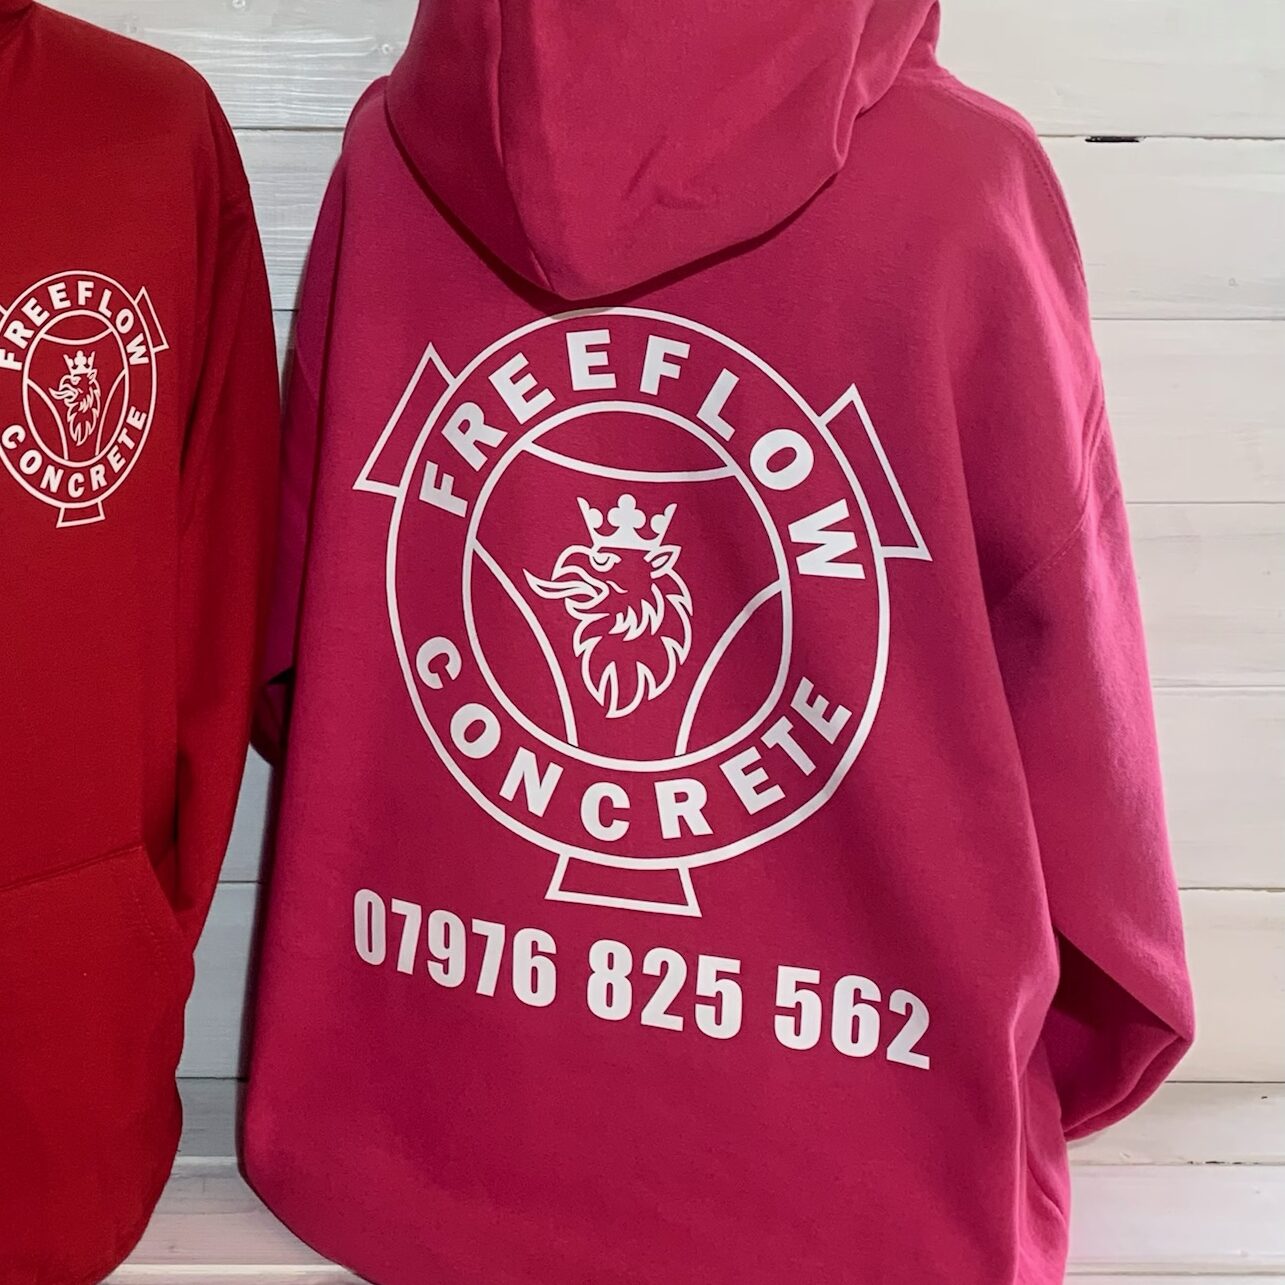 Two red hoodies with FREEFLOW CONCRETE printed on them by B-Stitch embroidery and printing in Worcestershire displayed against a white wooden background